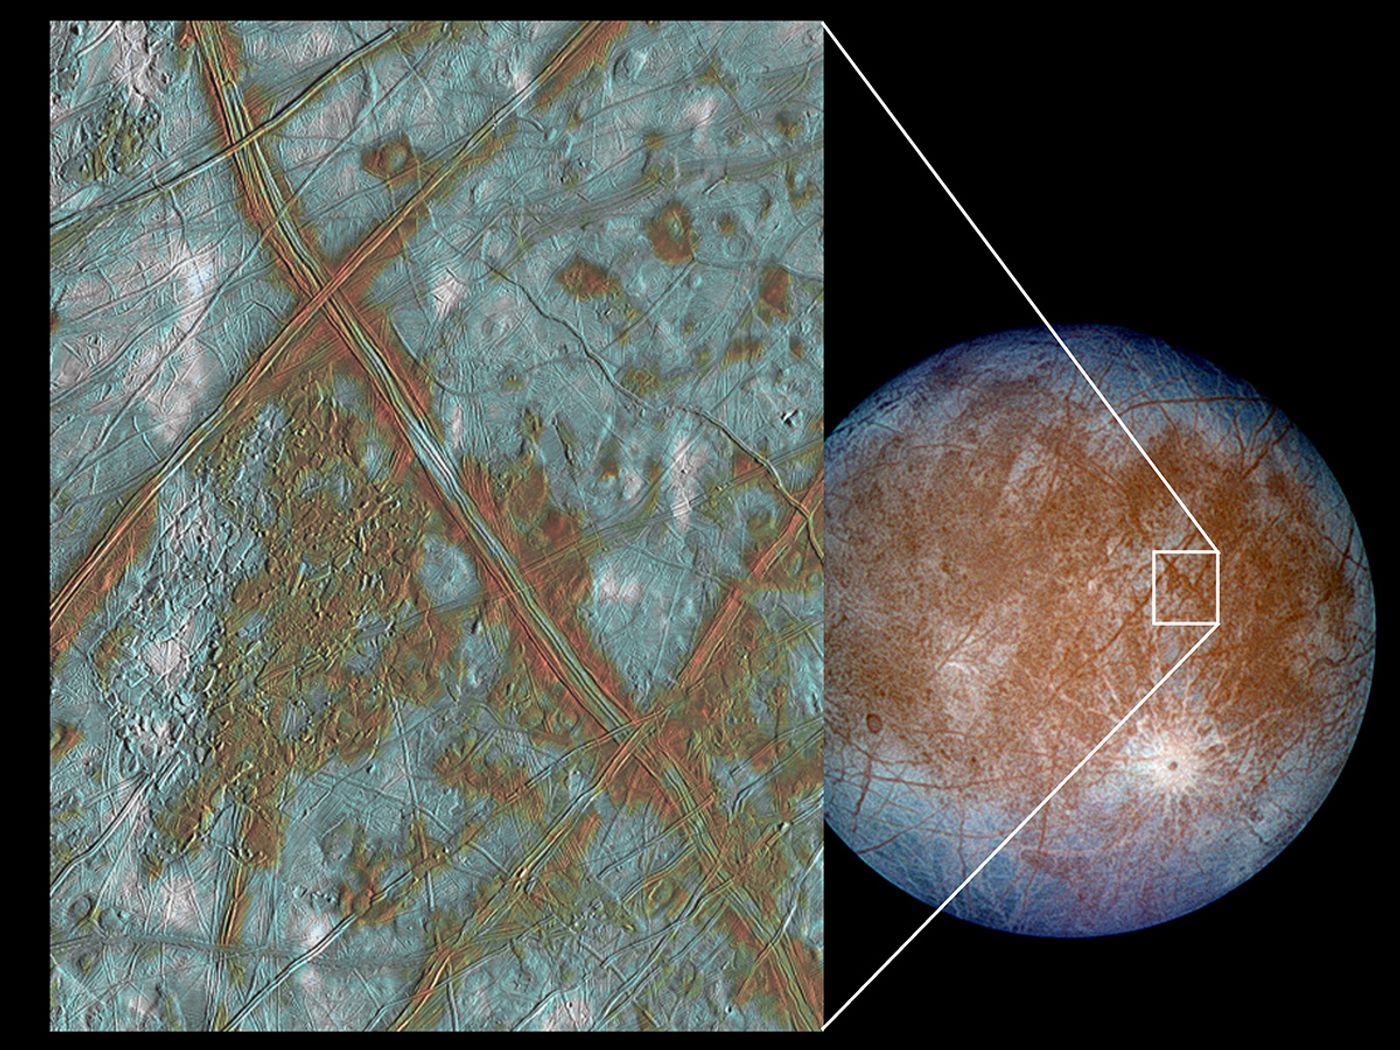 These images of Europa and its surface were taken by the Galileo spacecraft between late 1996 and early 1997 show blocks in the crust that provide further evidence for a subsurface ocean. (Image Credit: NASA/NASA JPL/University of Arizona)